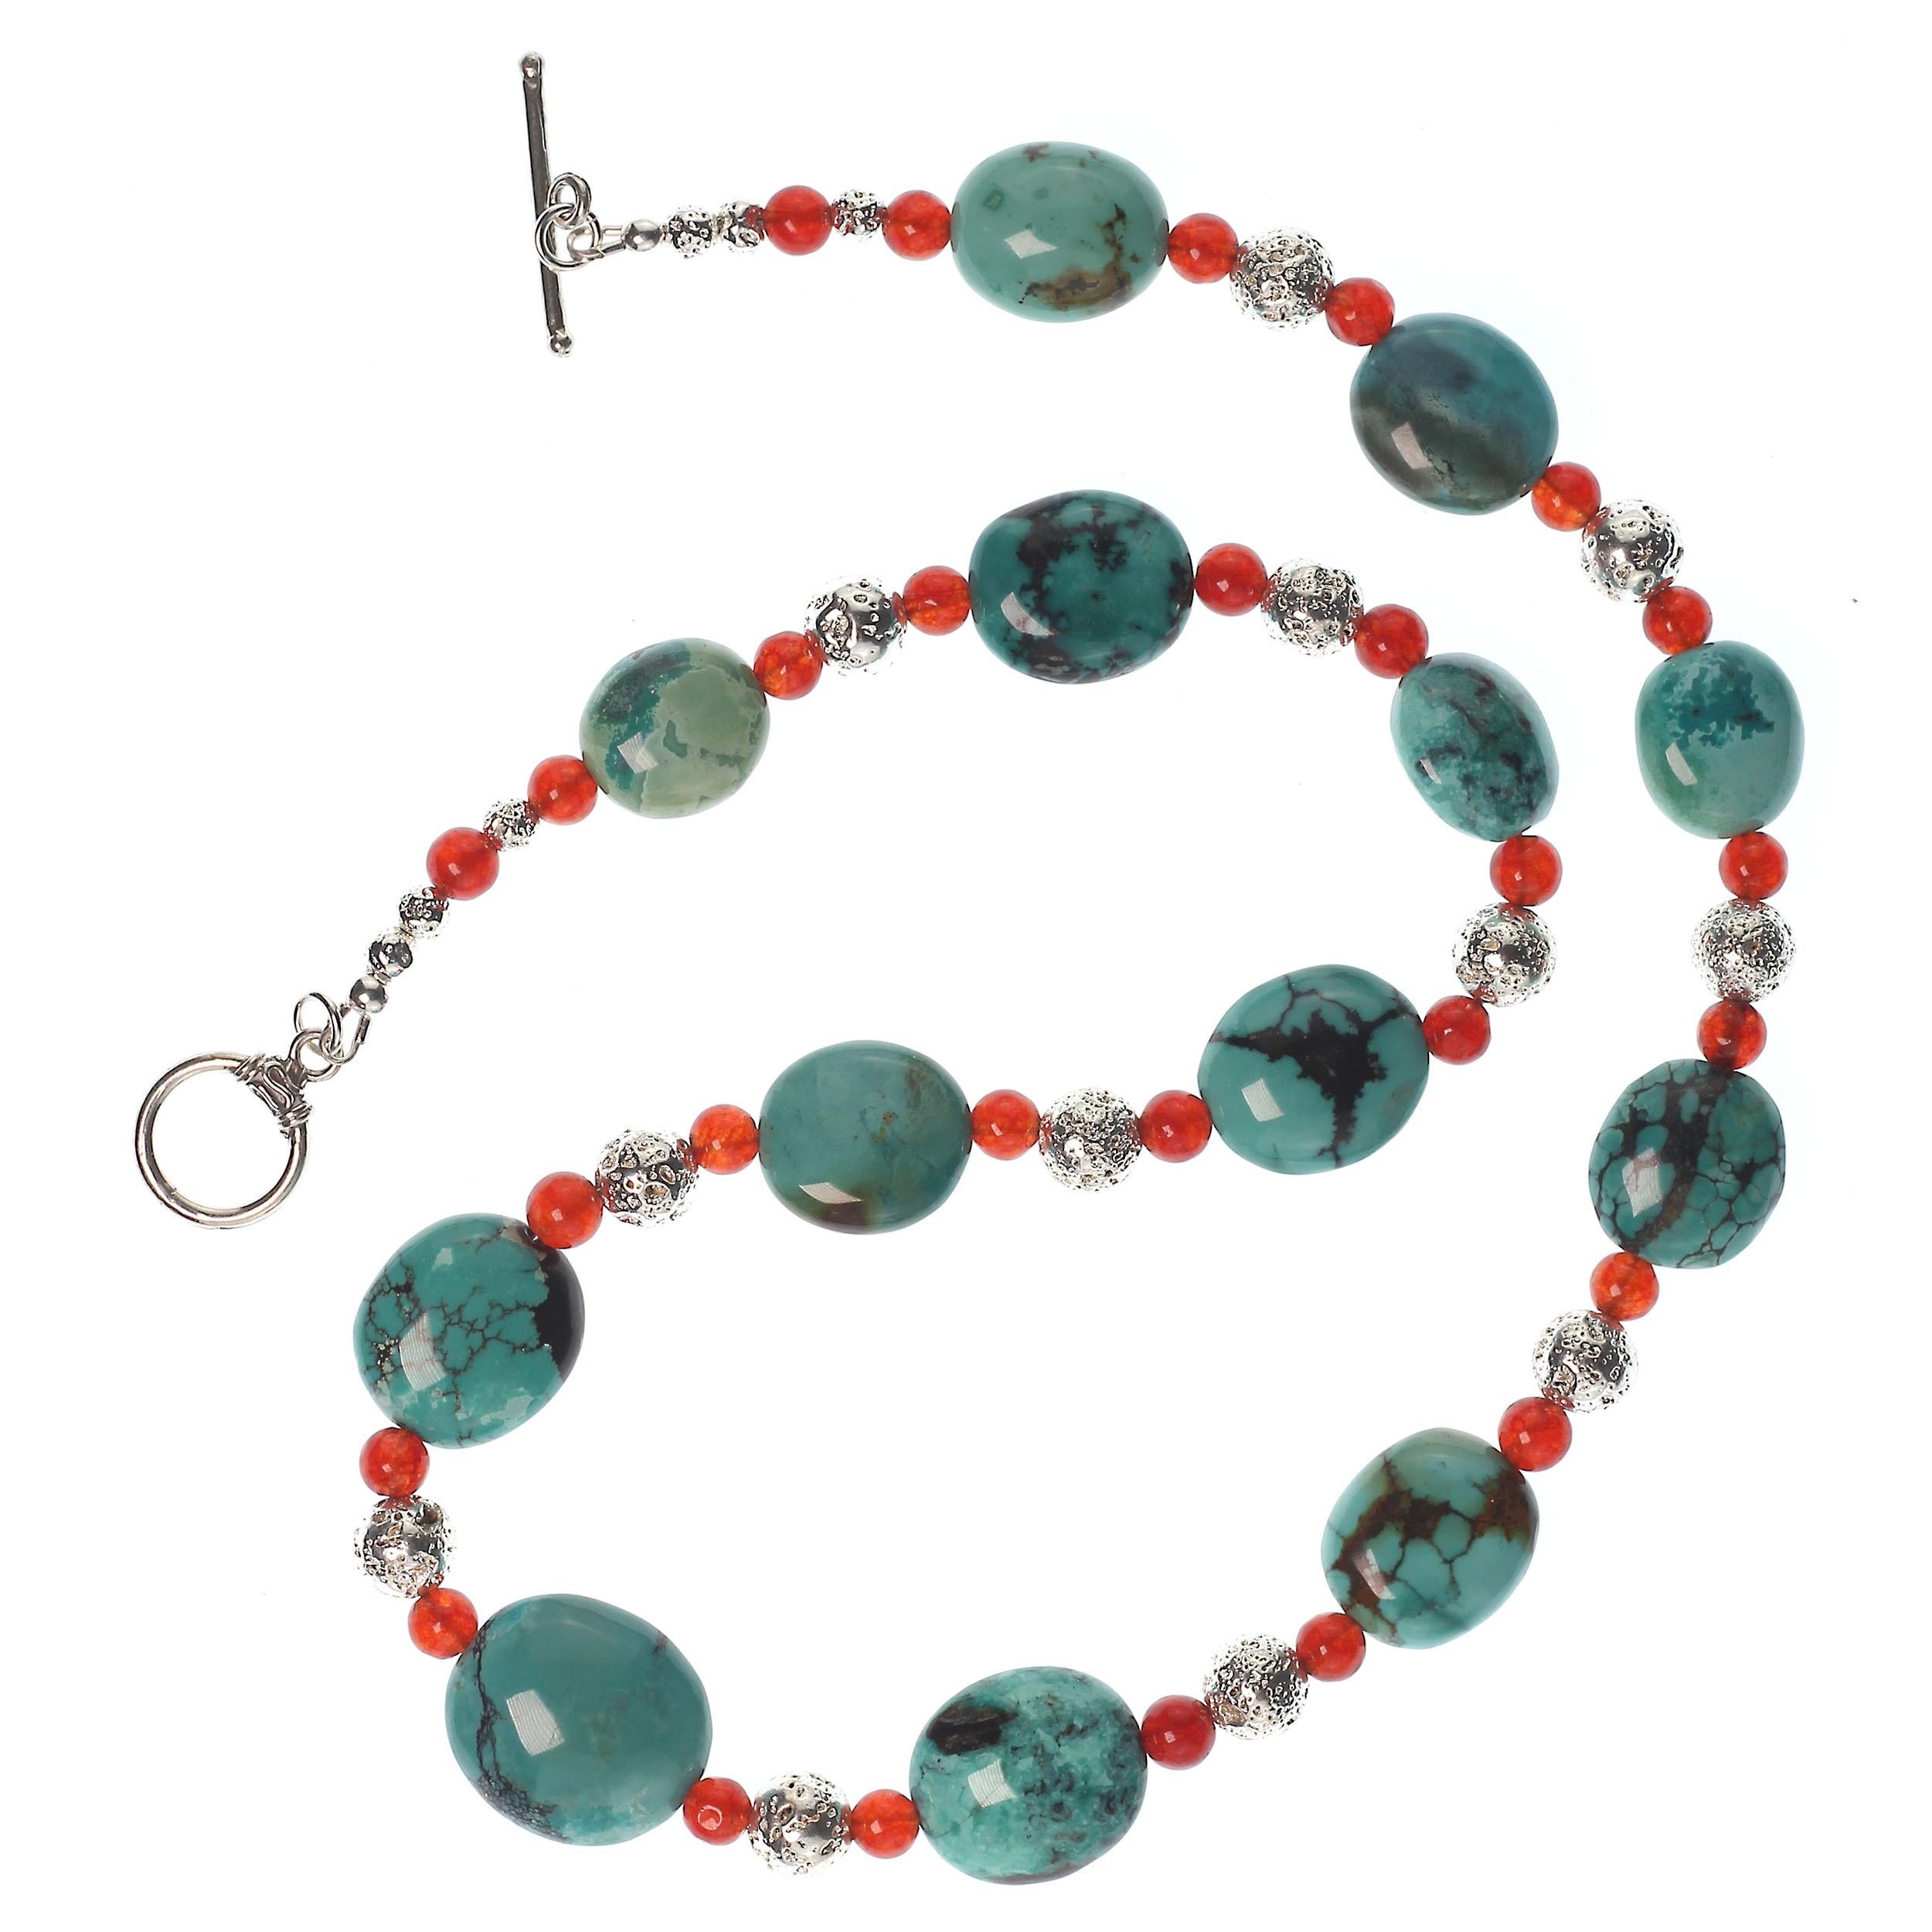 Artisan AJD 22 Inch Southwest Influence Necklace of Turquoise, Carnelian, and Silver